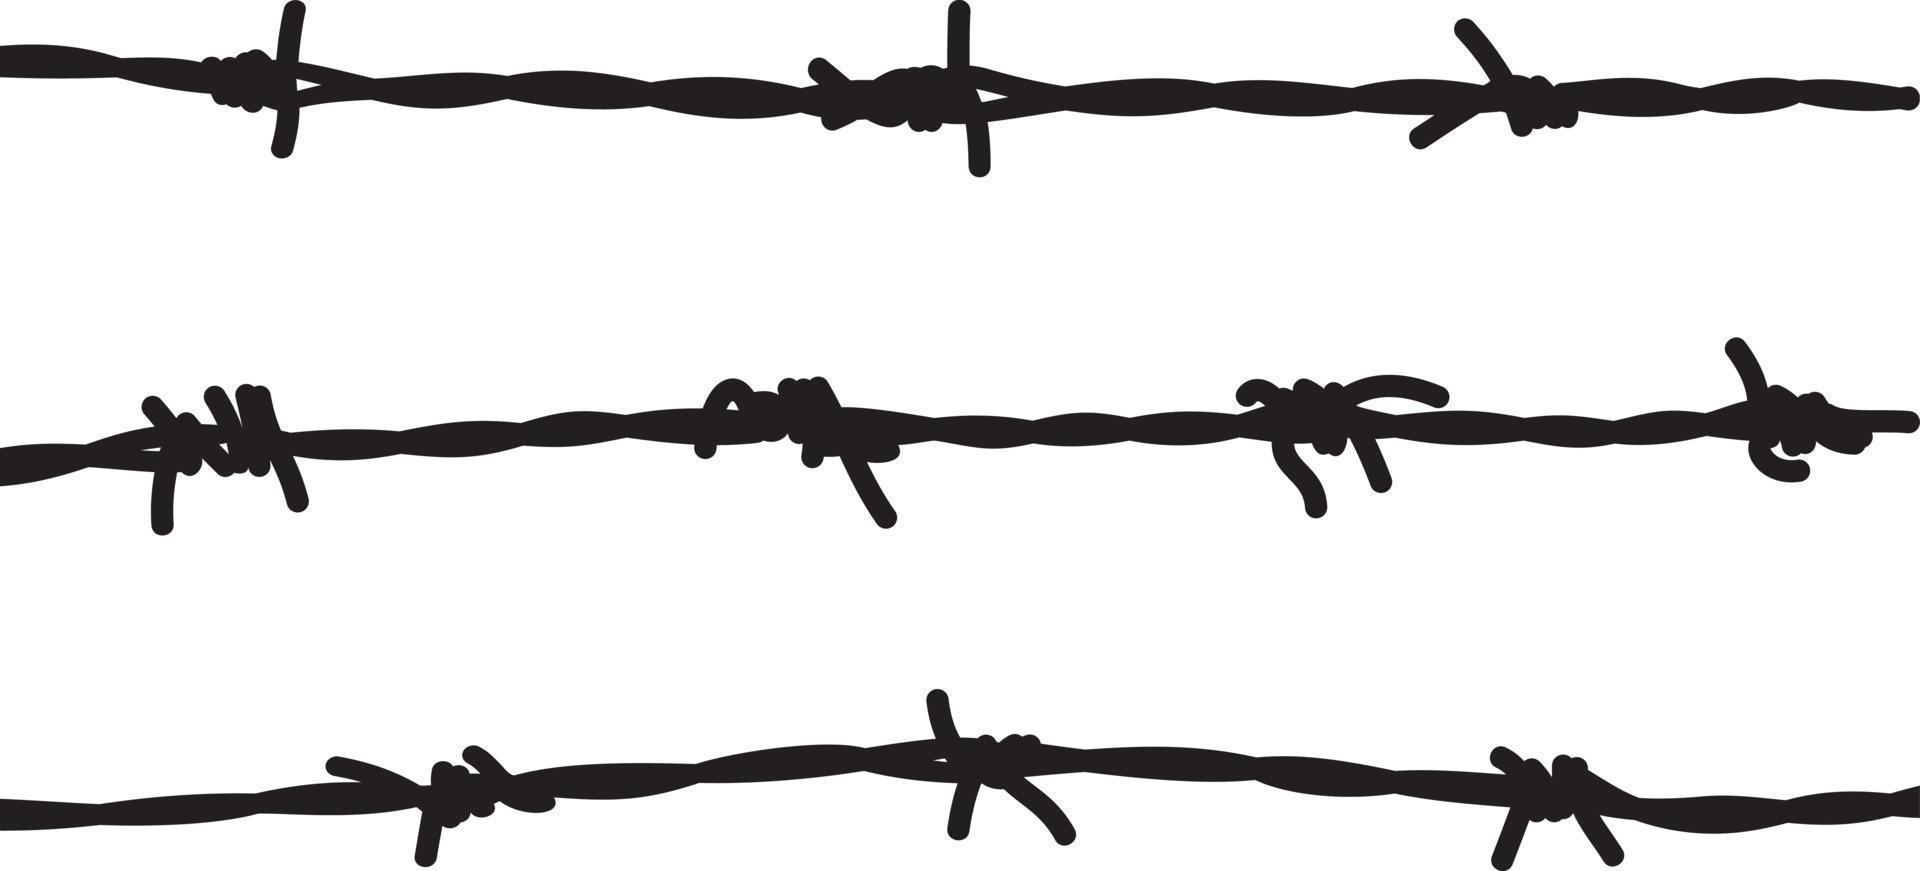 Barbed Wire silhouette vector